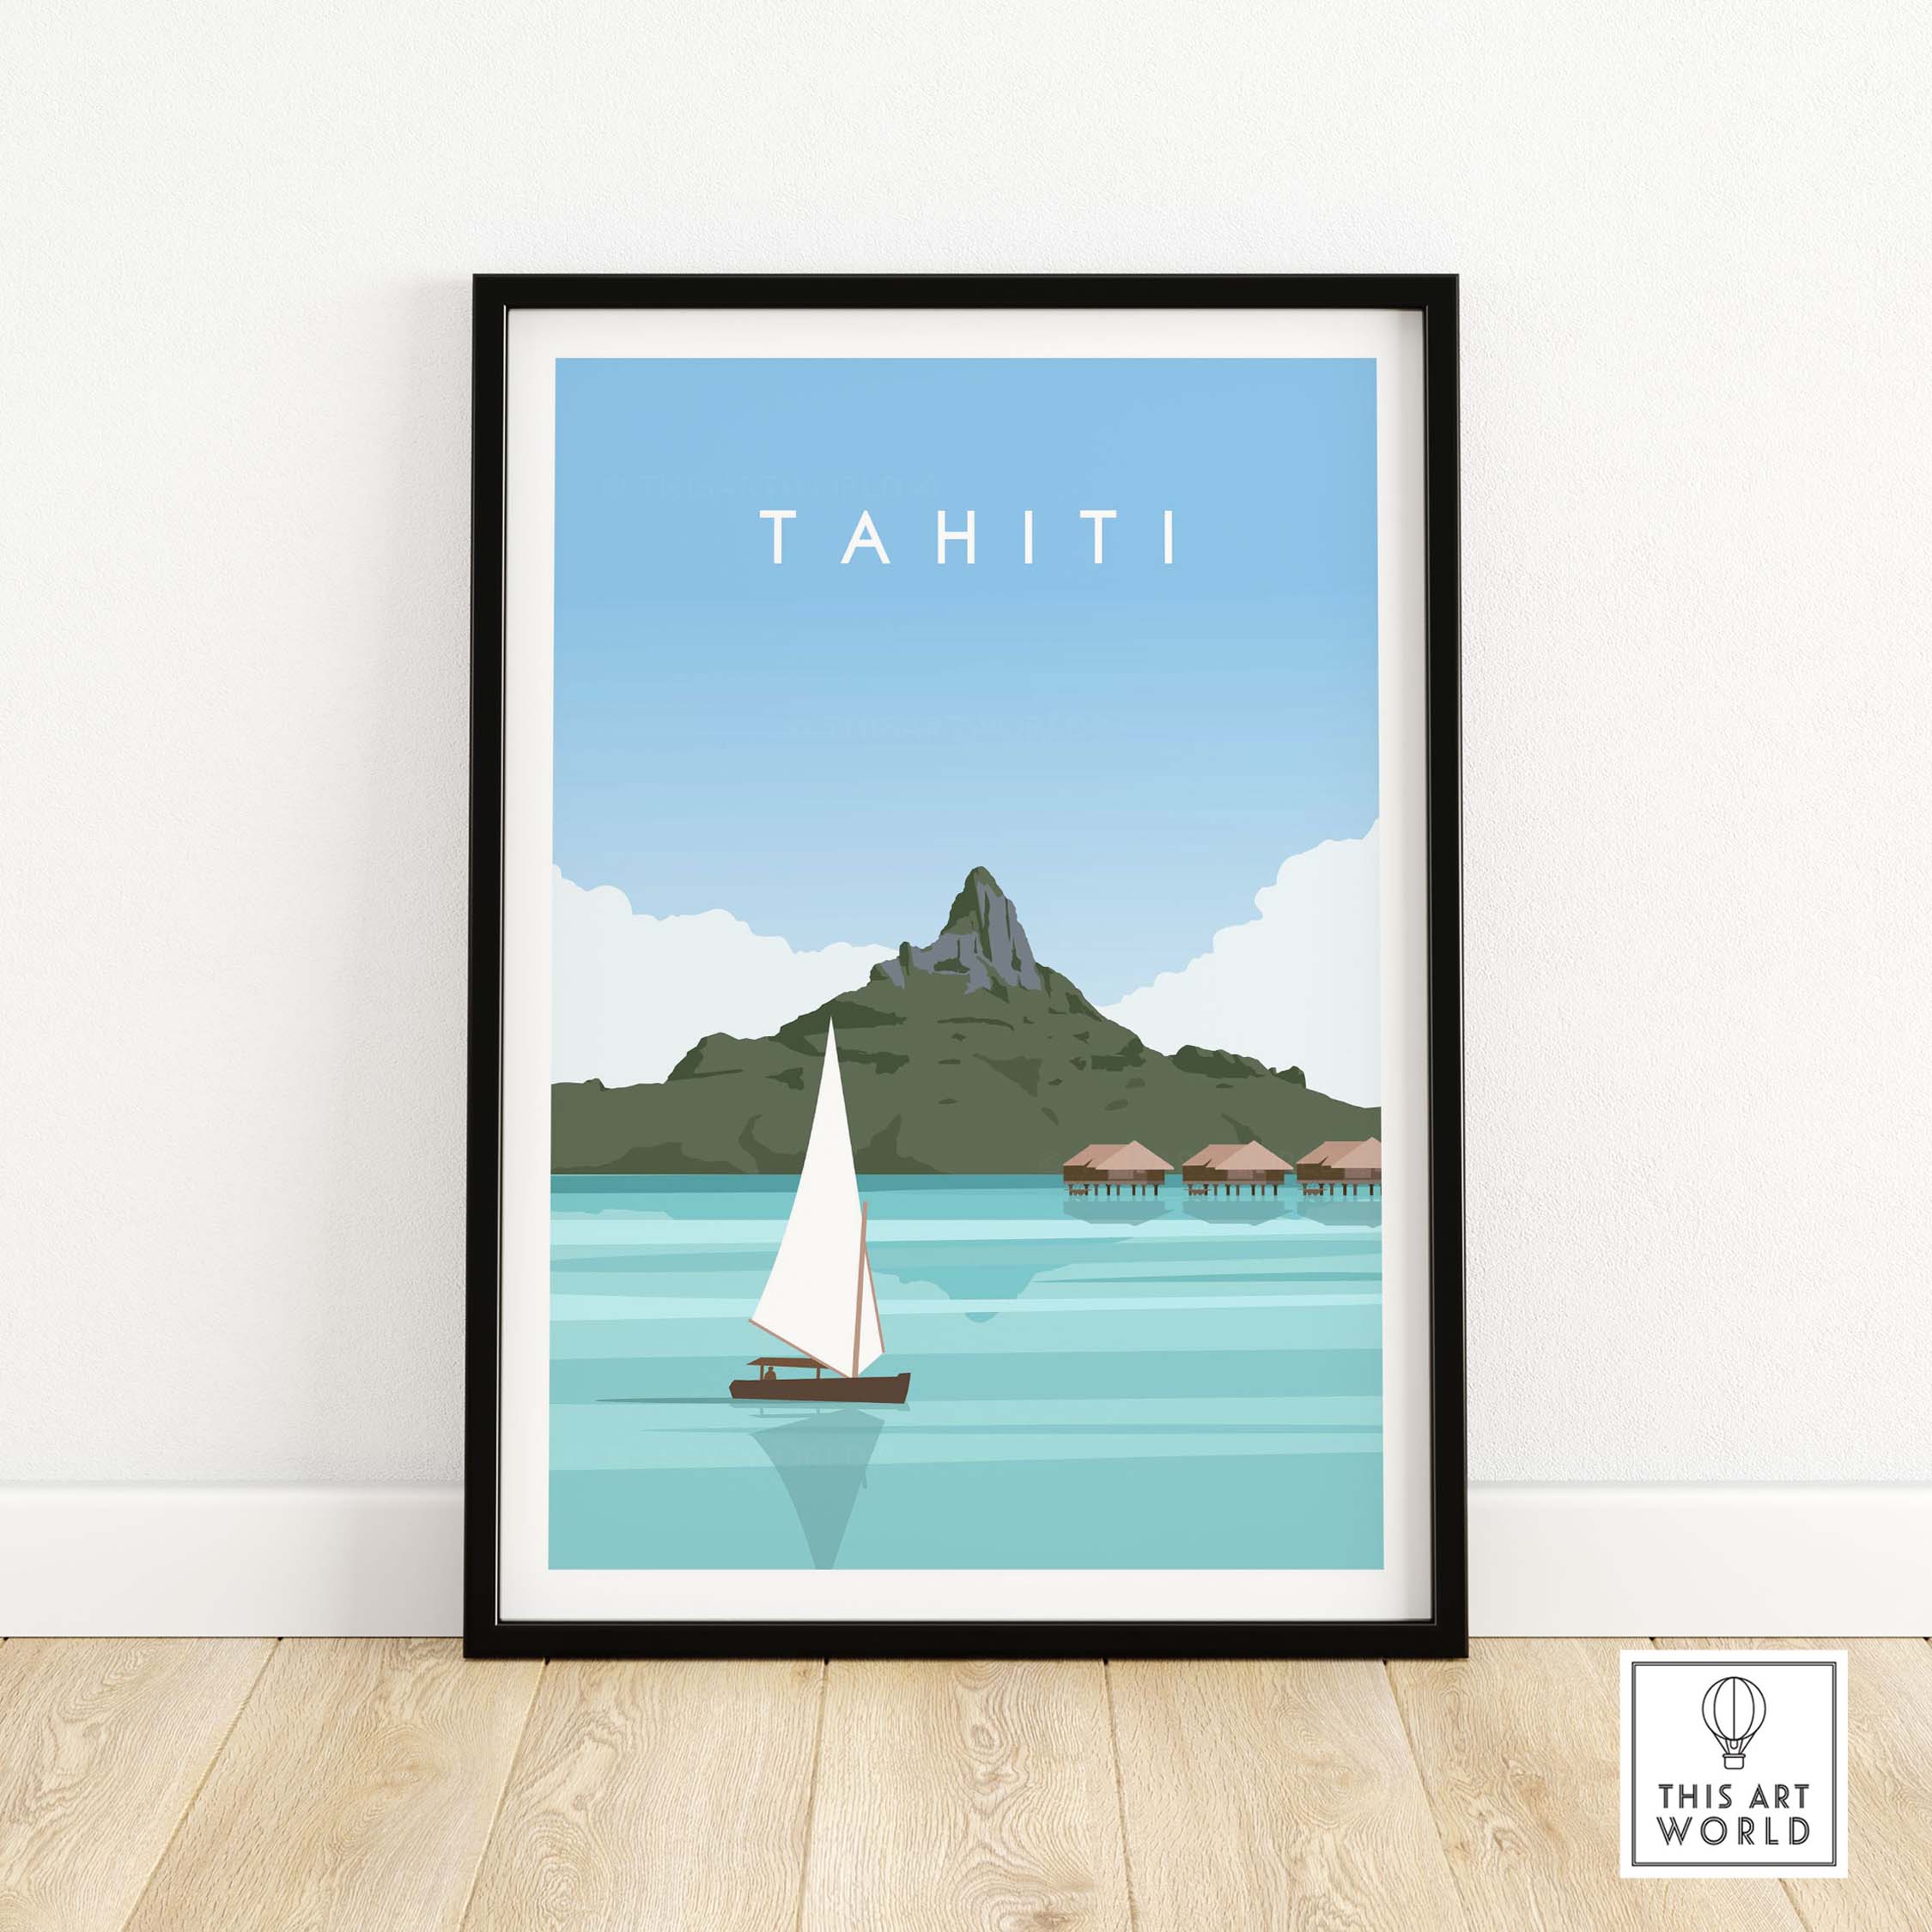 Shop Travel Posters and Wanderlust Wall Art | This Art World